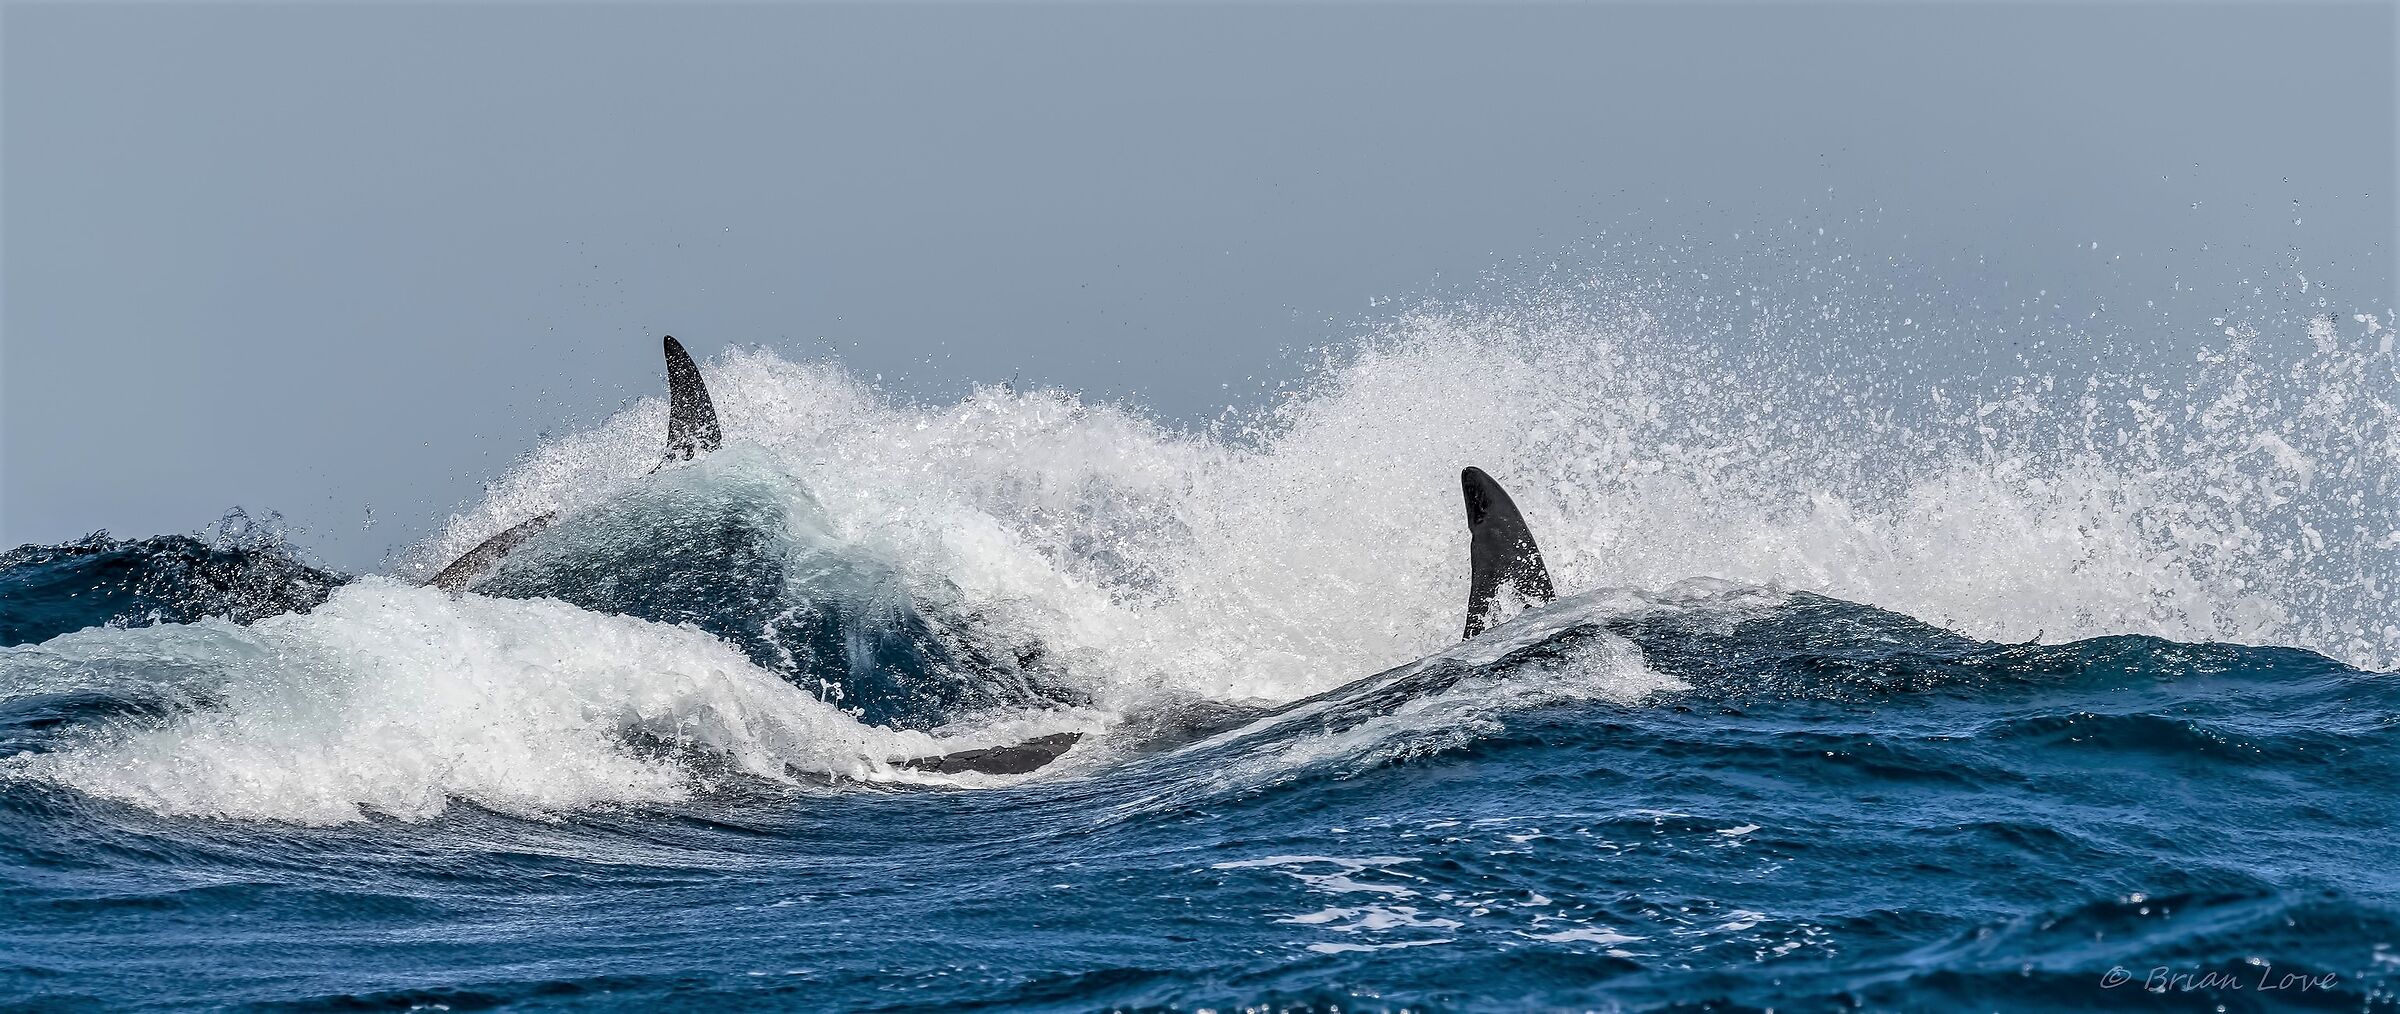 Killer Whales Hunting...